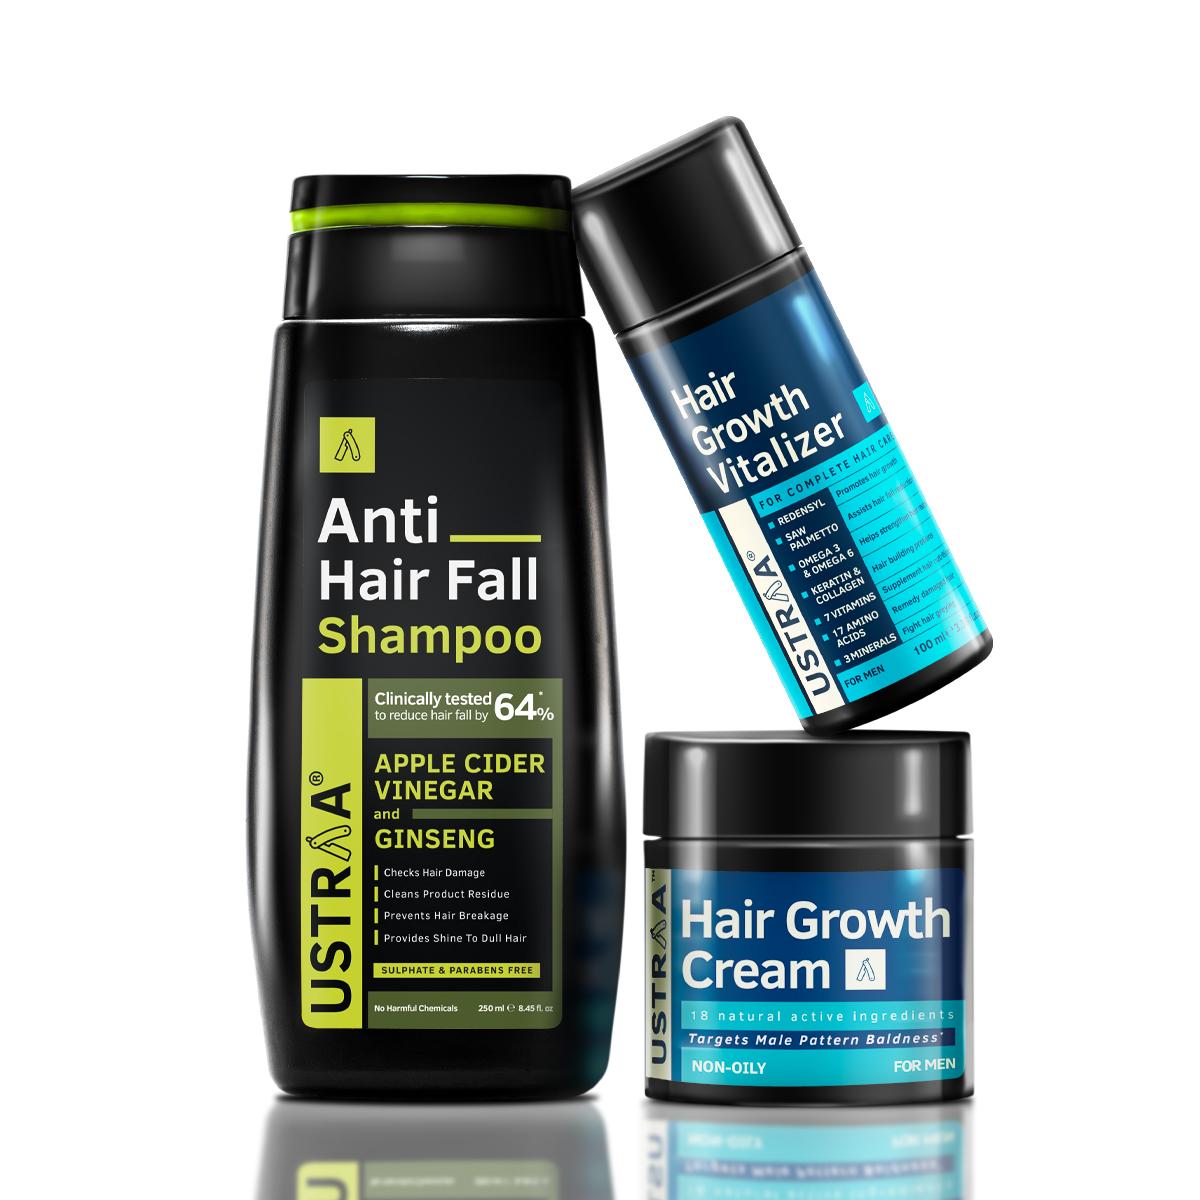 Ustraa Complete Treatment Hair Growth Kit for Men : Hair Growth Vitalizer, Hair Growth Cream & Anti-Hairfall Shampoo